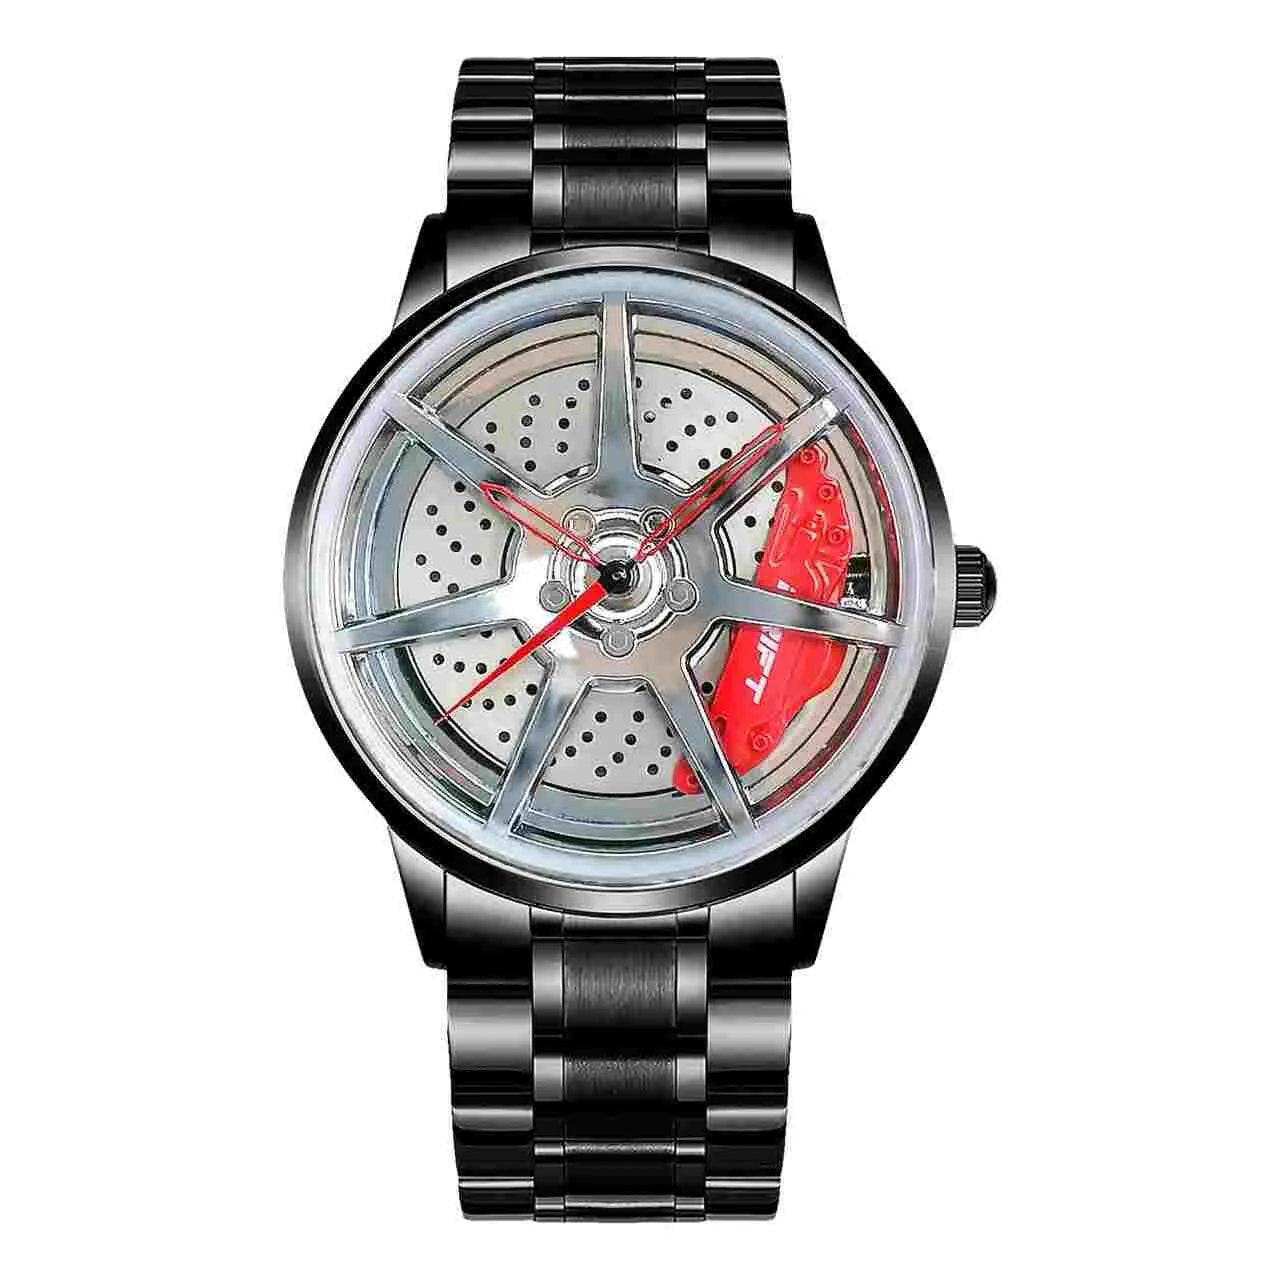 Introducing the Black-Silver Drift Rim Watch – a fusion of style and passion. Crafted by a young German startup, this innovative design speaks to motorsport, tuning, and auto aficionados. Rev up your wrist game! #id_46779158004042